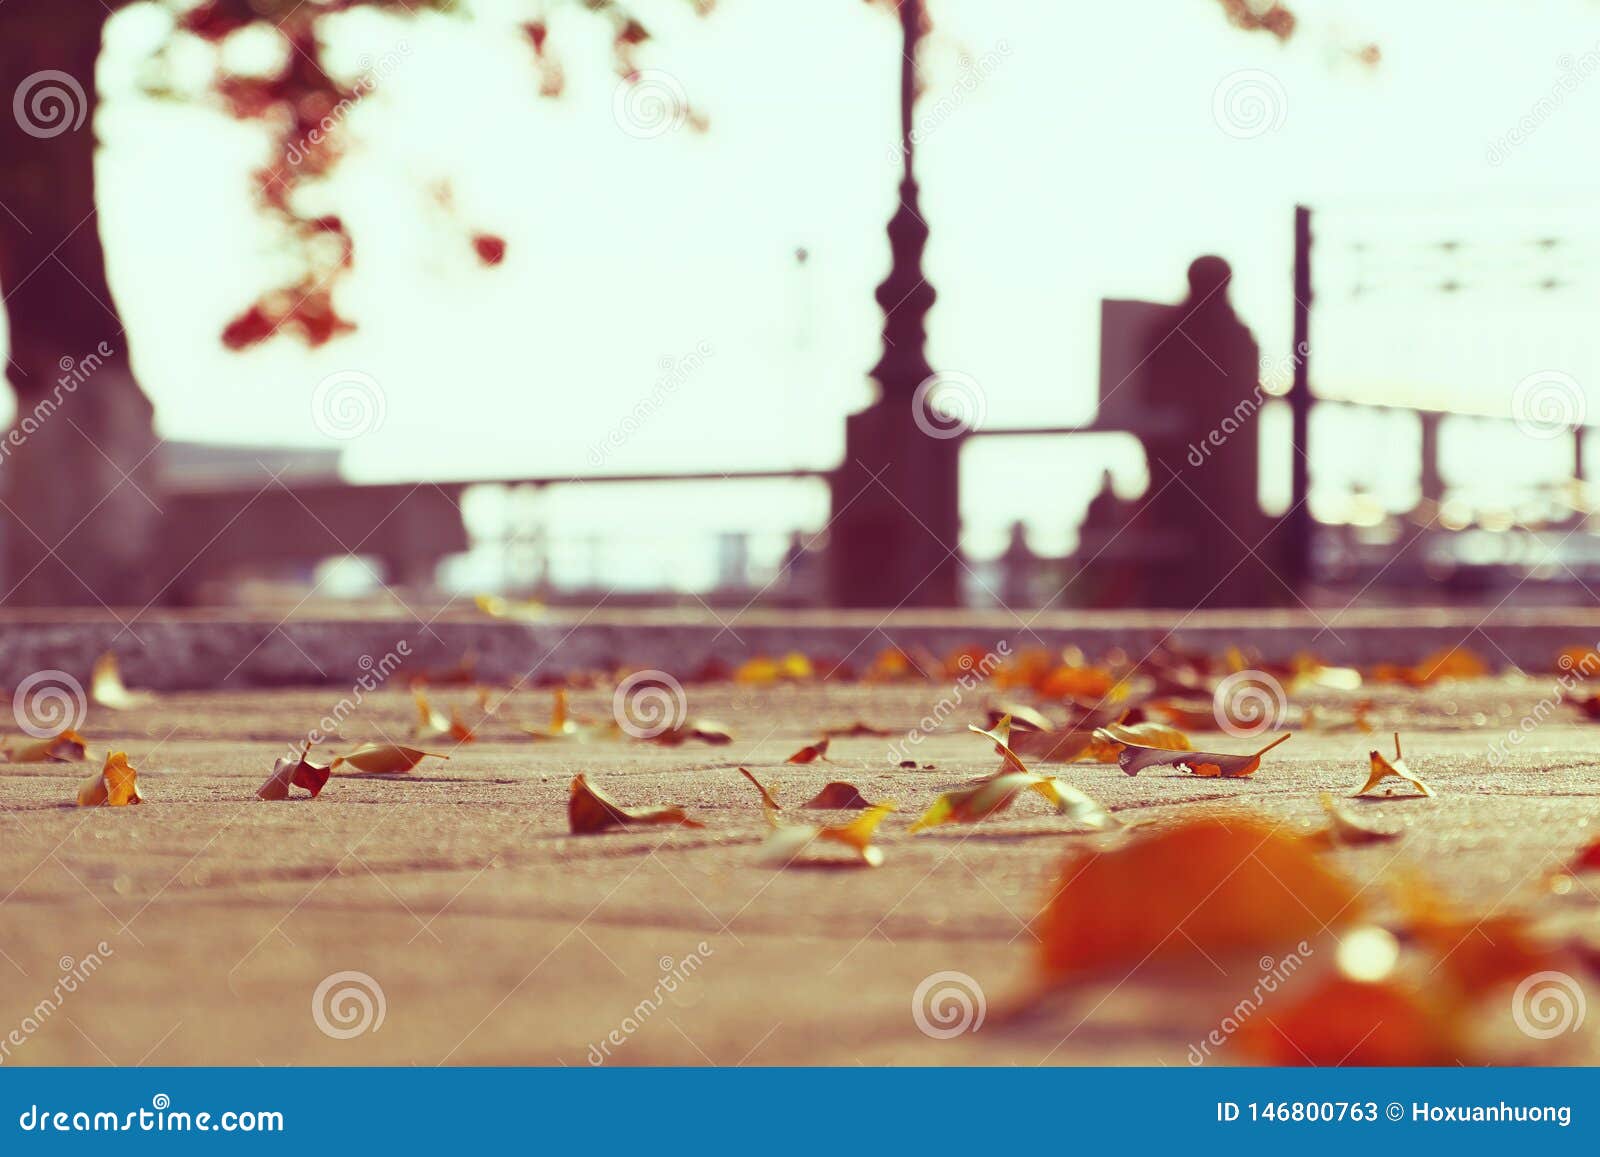 Close Up of Yellow Leaves Make Sad Concept with Blurred Background Stock  Image - Image of sorry, lonely: 146800763